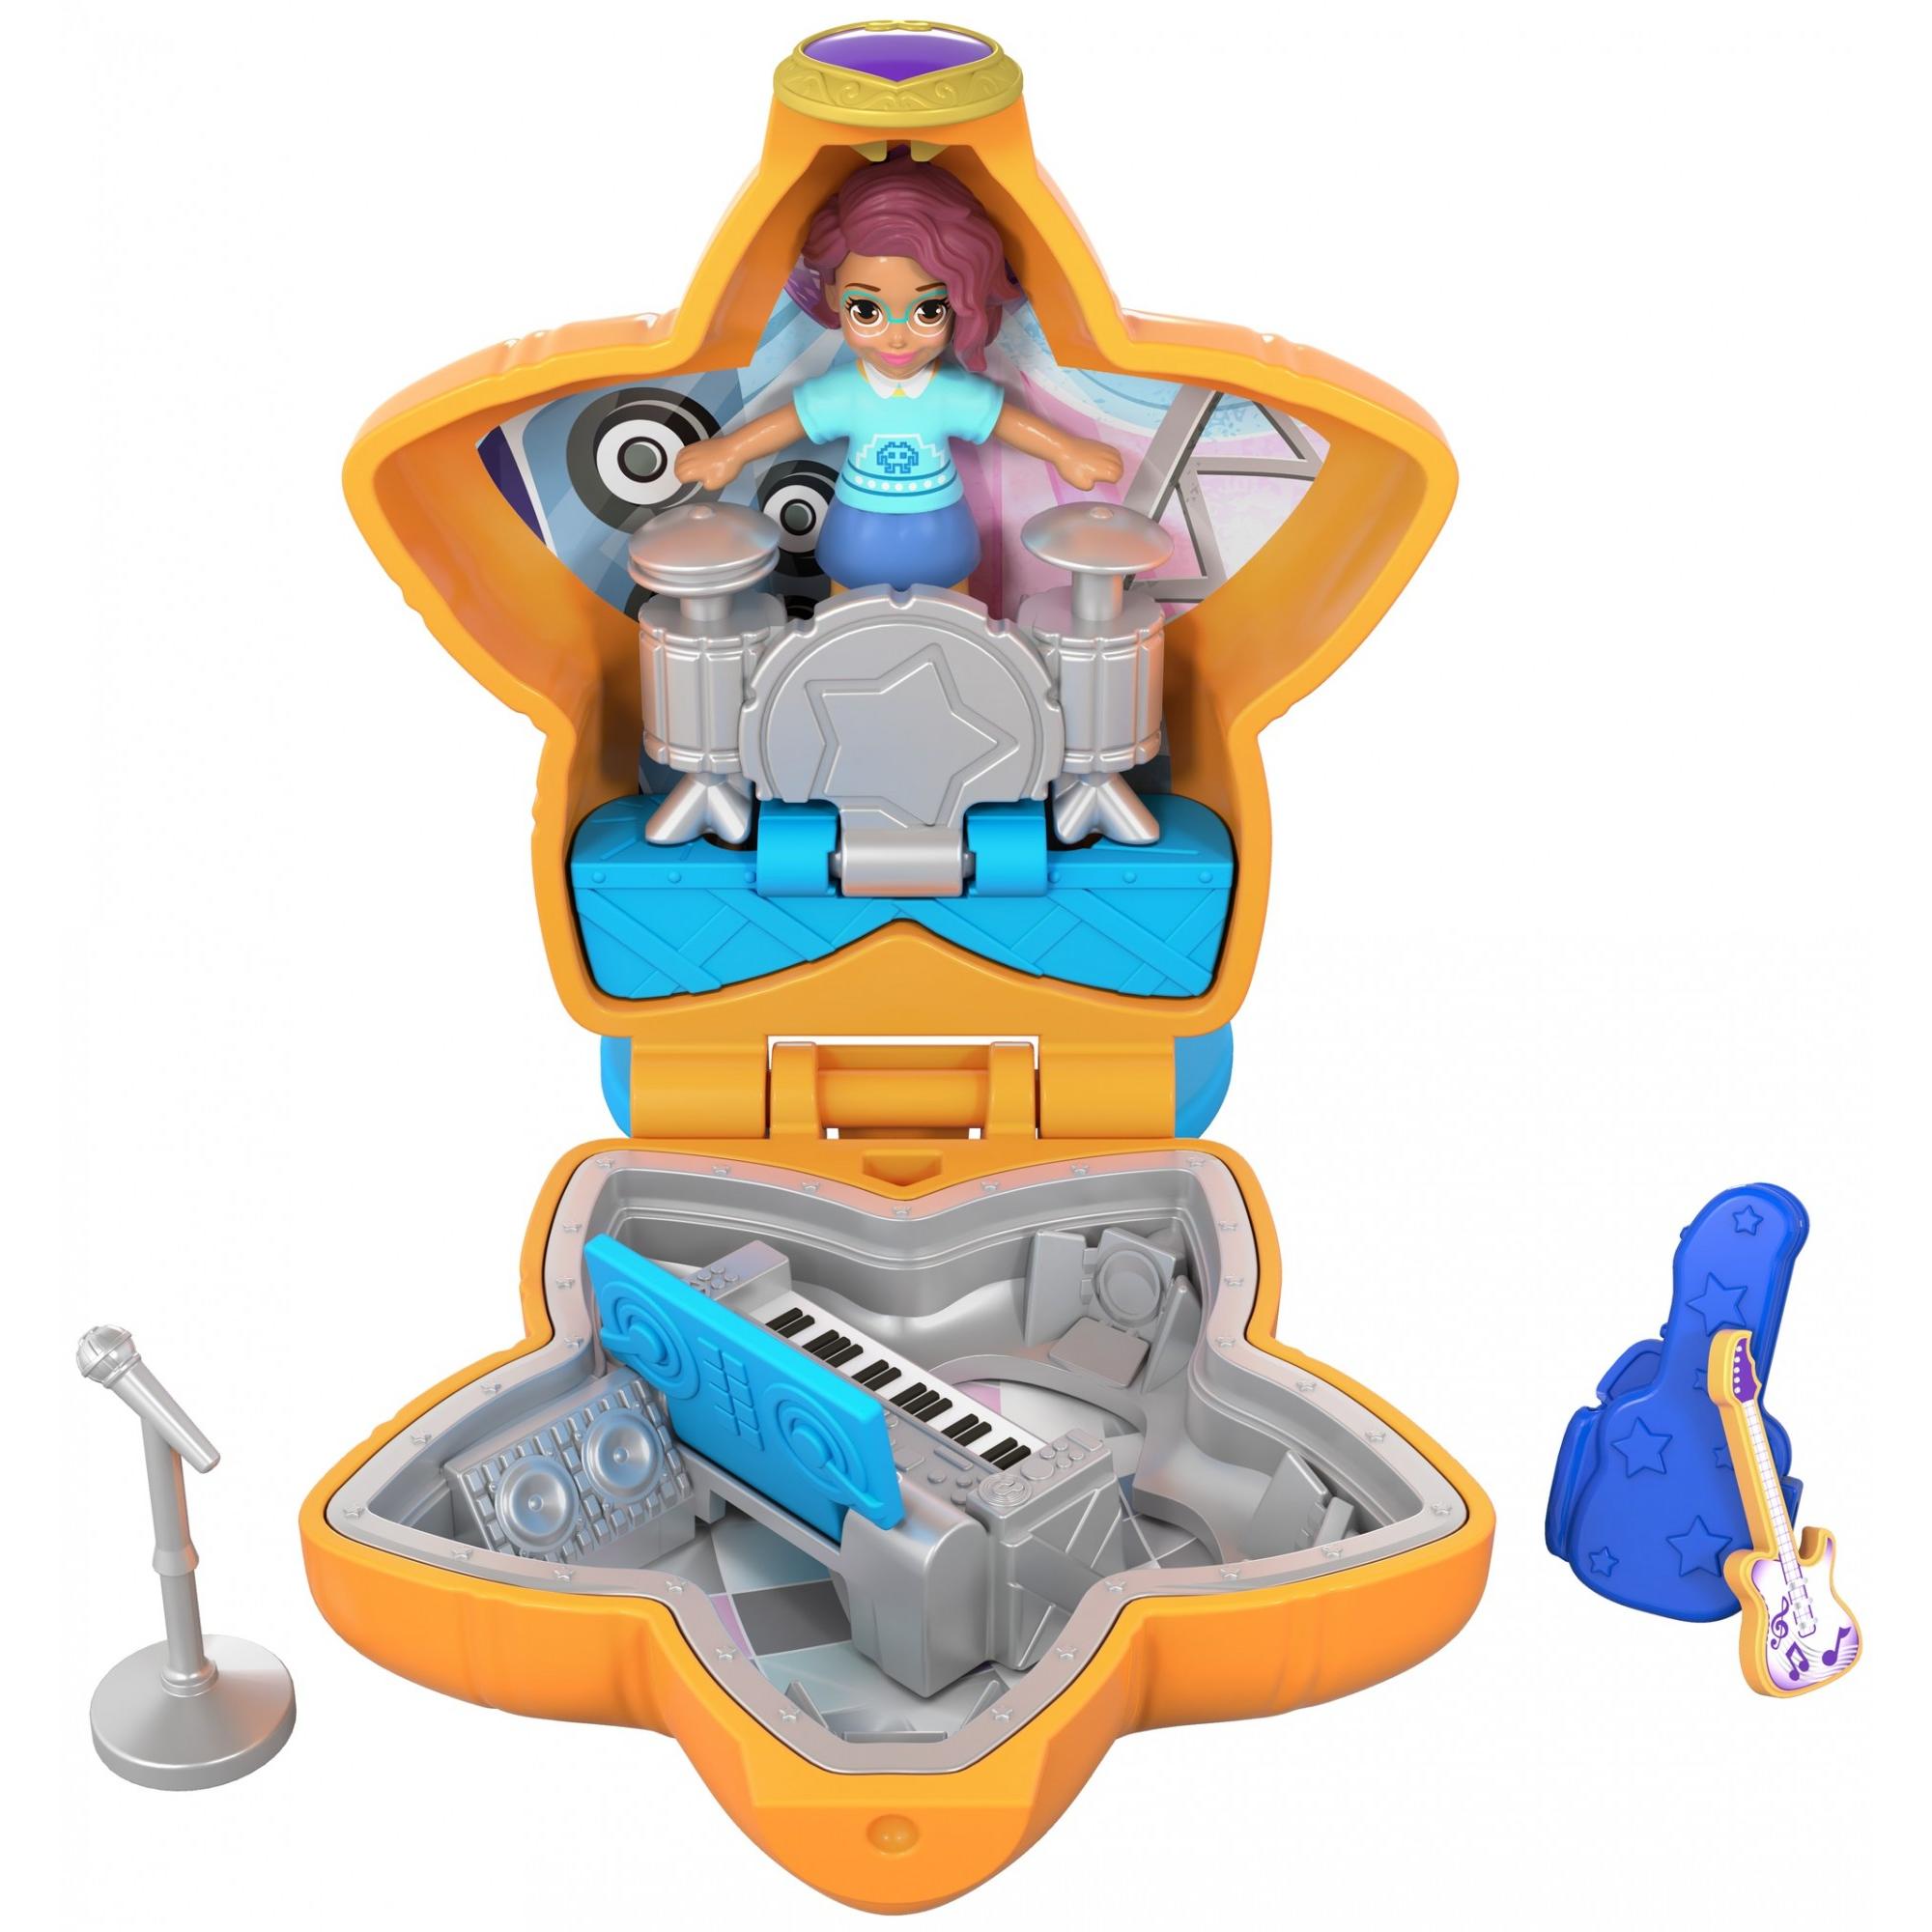 Polly Pocket Tiny Pocket Places Teeny Boppin' Concert Music Compact with Doll - image 1 of 7